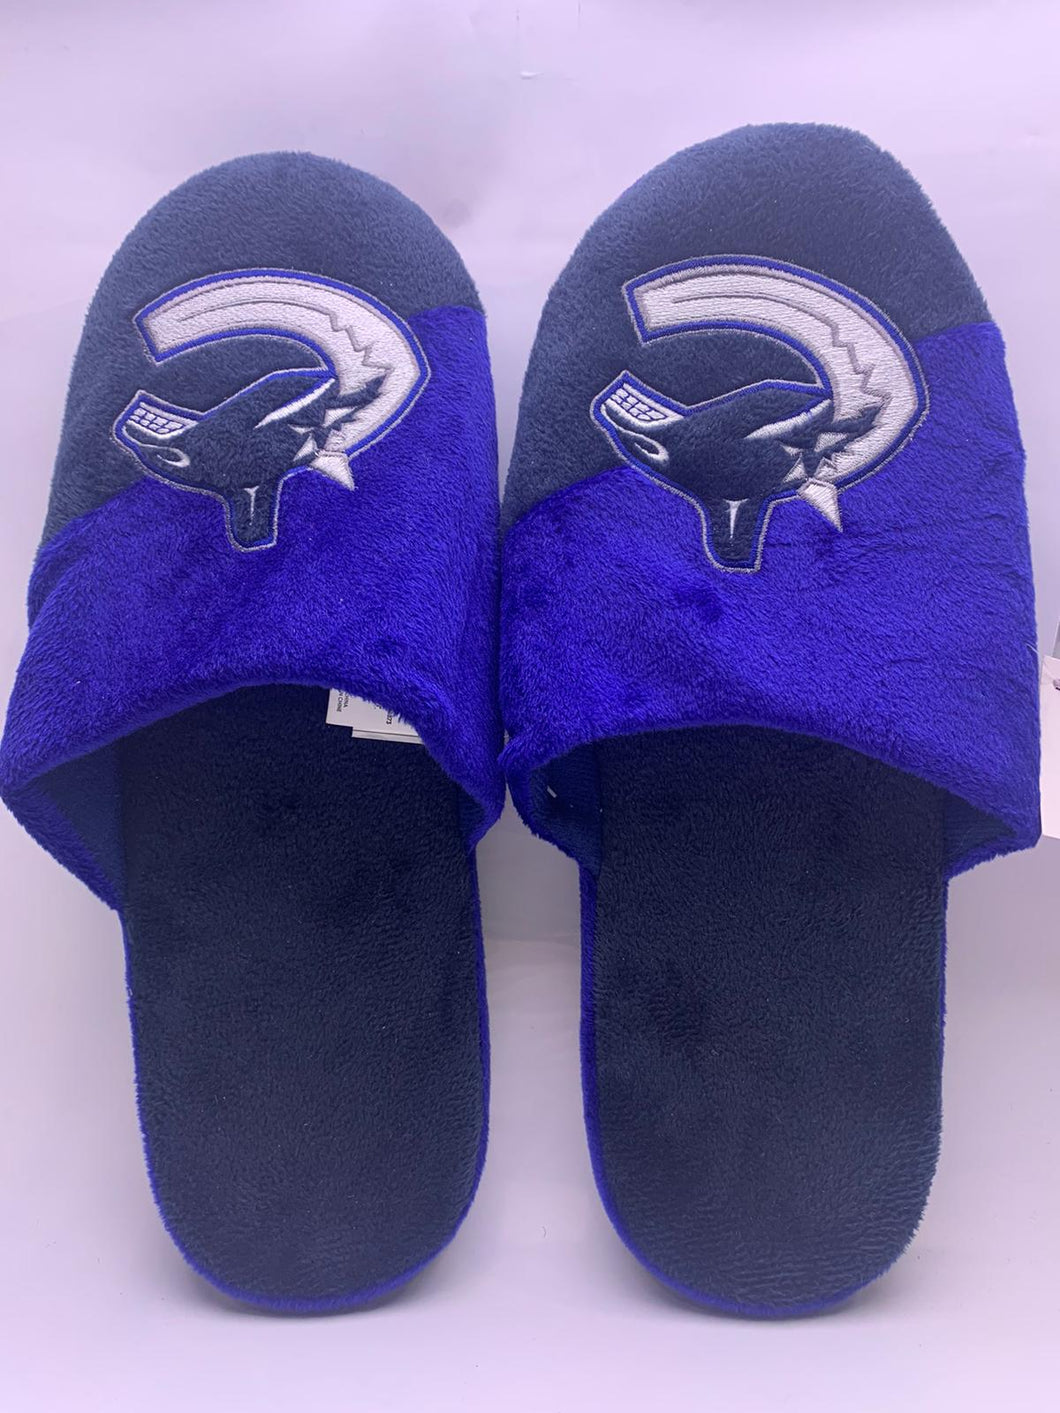 Vancouver Canucks Slippers